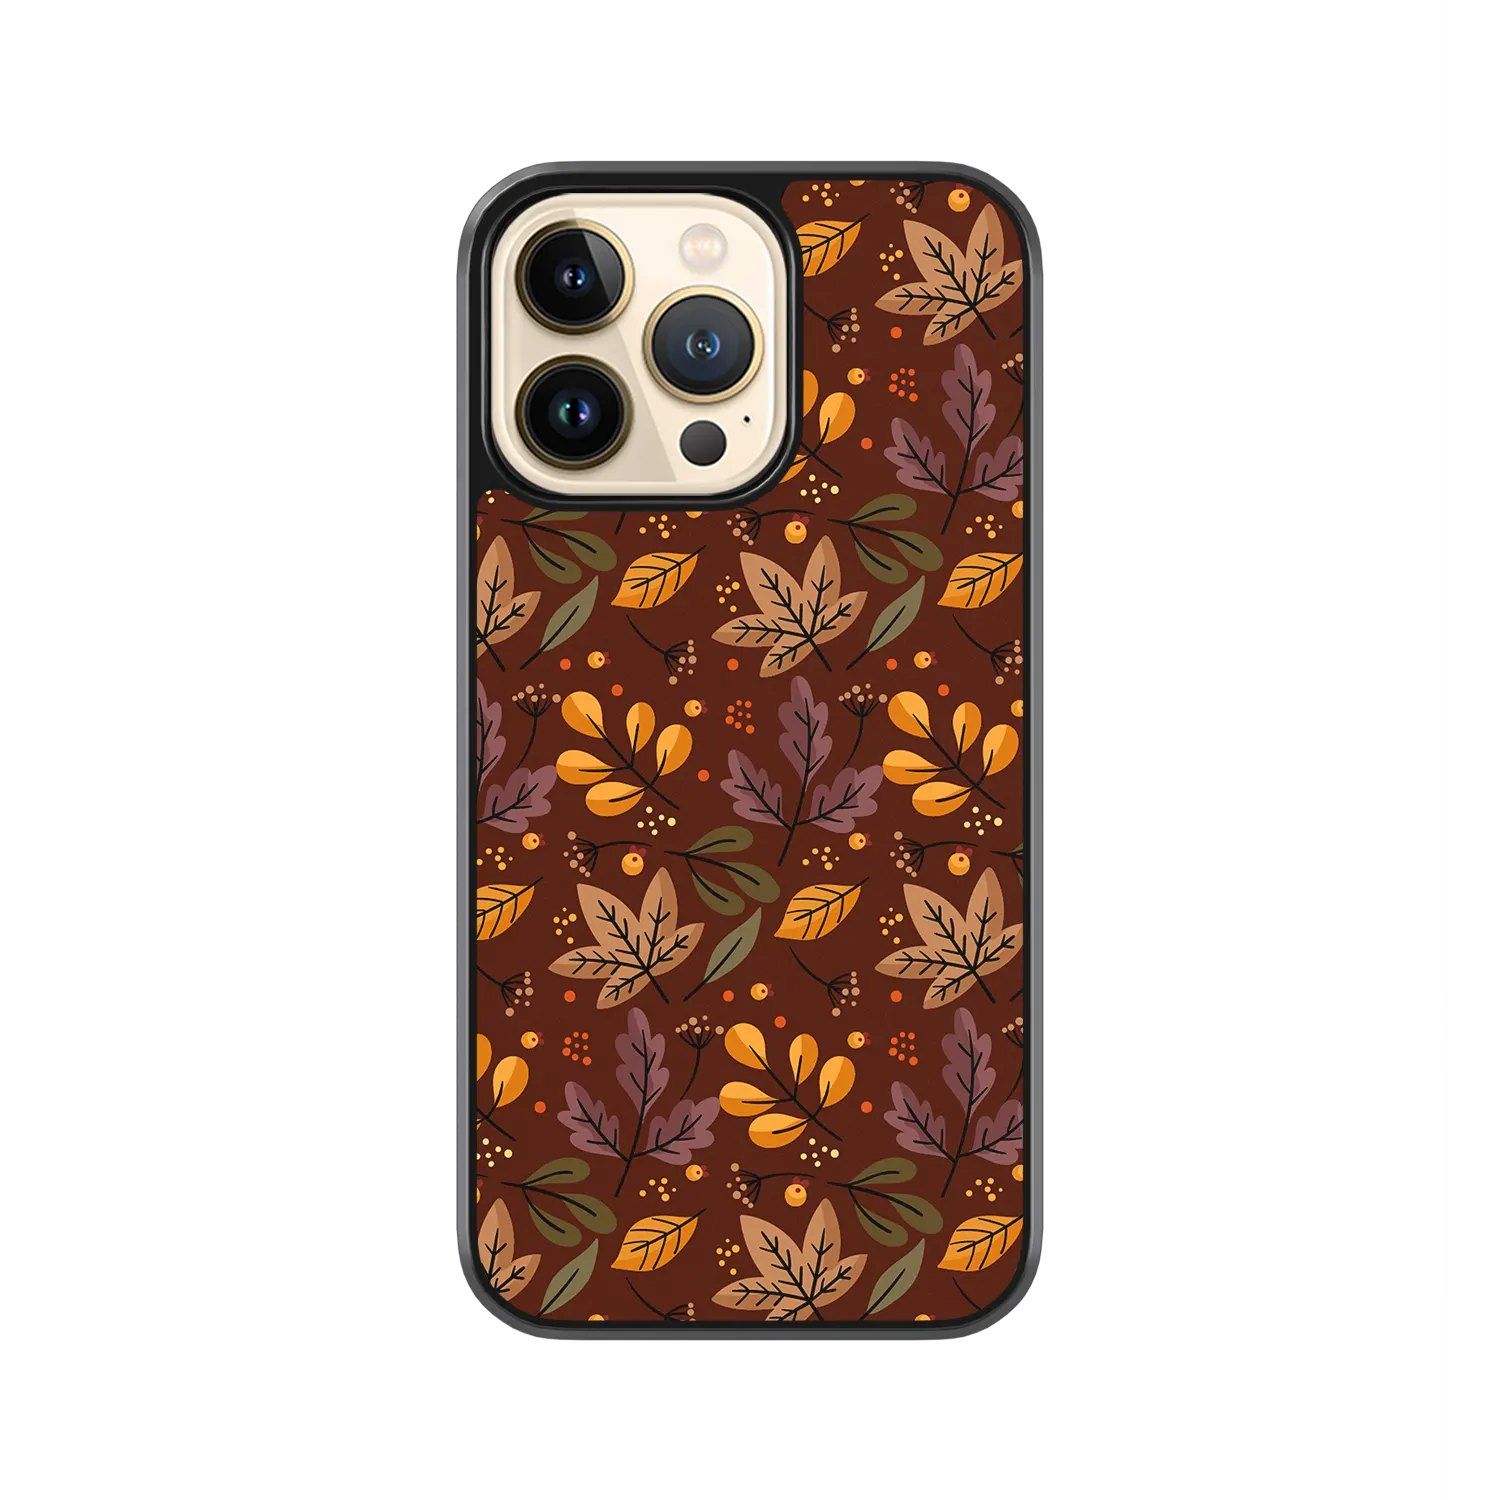 Fall-Leaves-iPhone-12-Pro-Max-Case.webp